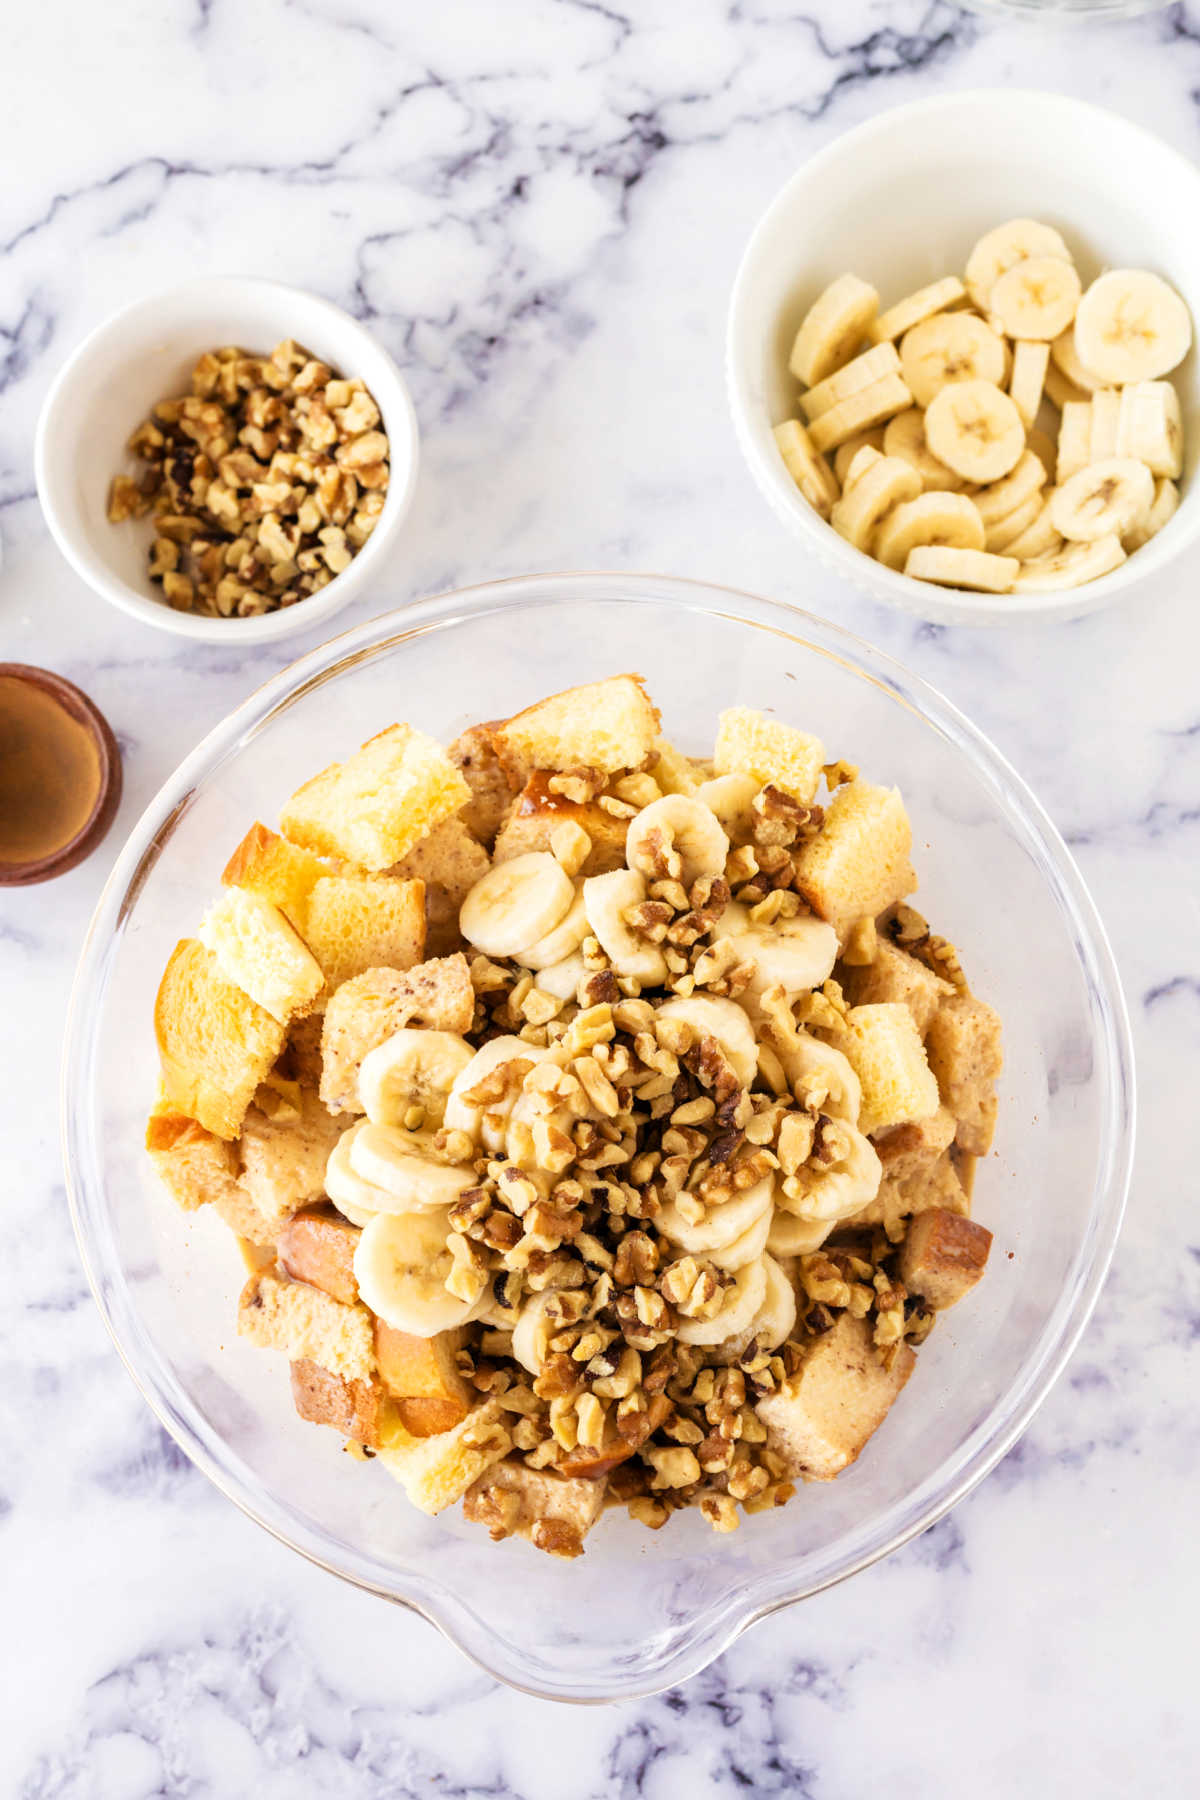 Bowl of bread cubes with sliced bananas, walnuts, and custard.